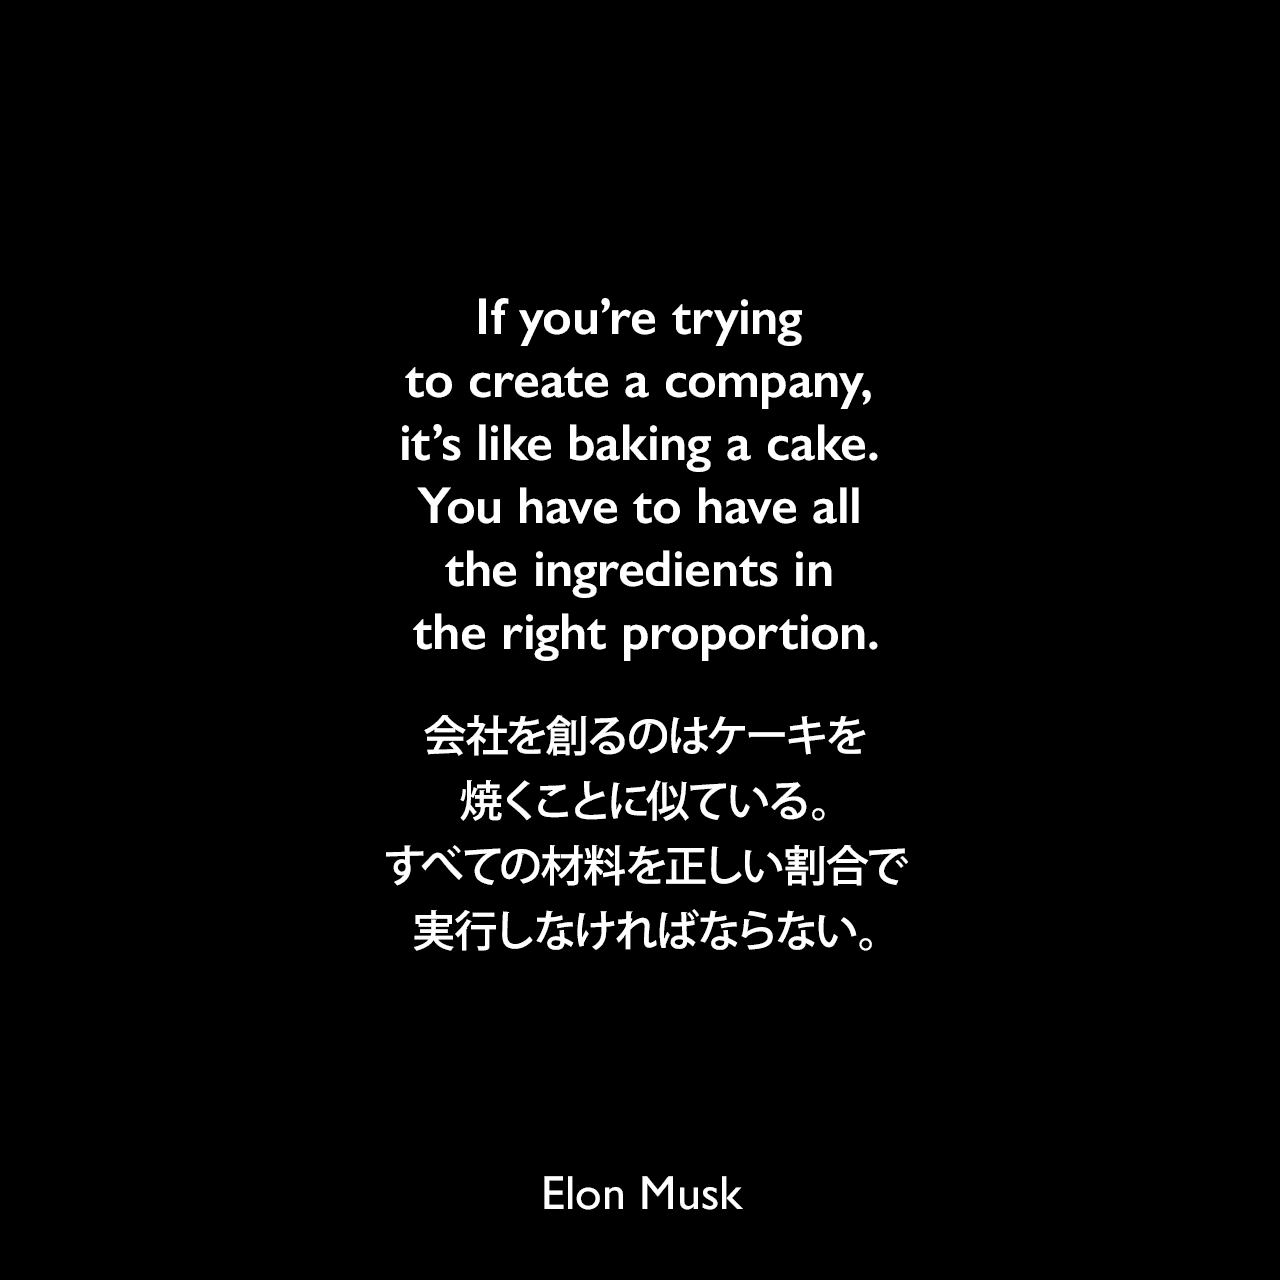 If you’re trying to create a company, it’s like baking a cake. You have to have all the ingredients in the right proportion.会社を創るのはケーキを焼くことに似ている。すべての材料を正しい割合で実行しなければならない。Elon Musk